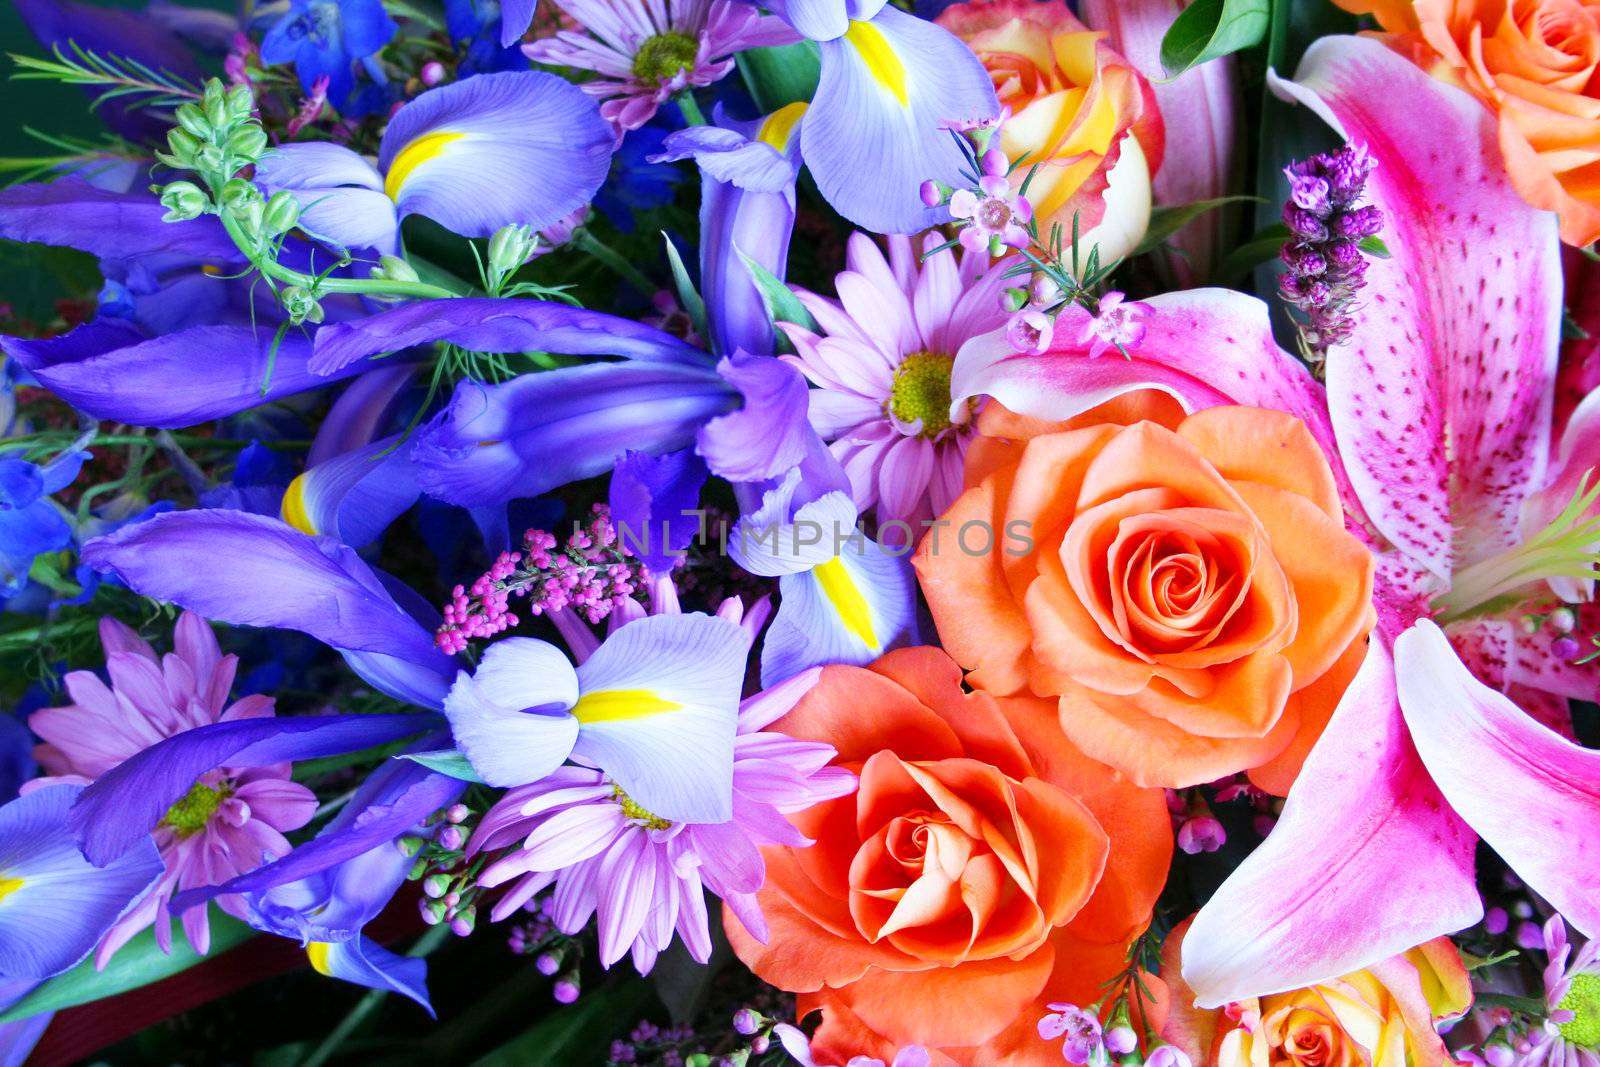 Bouquet of beautiful vibrant flowers by jarenwicklund